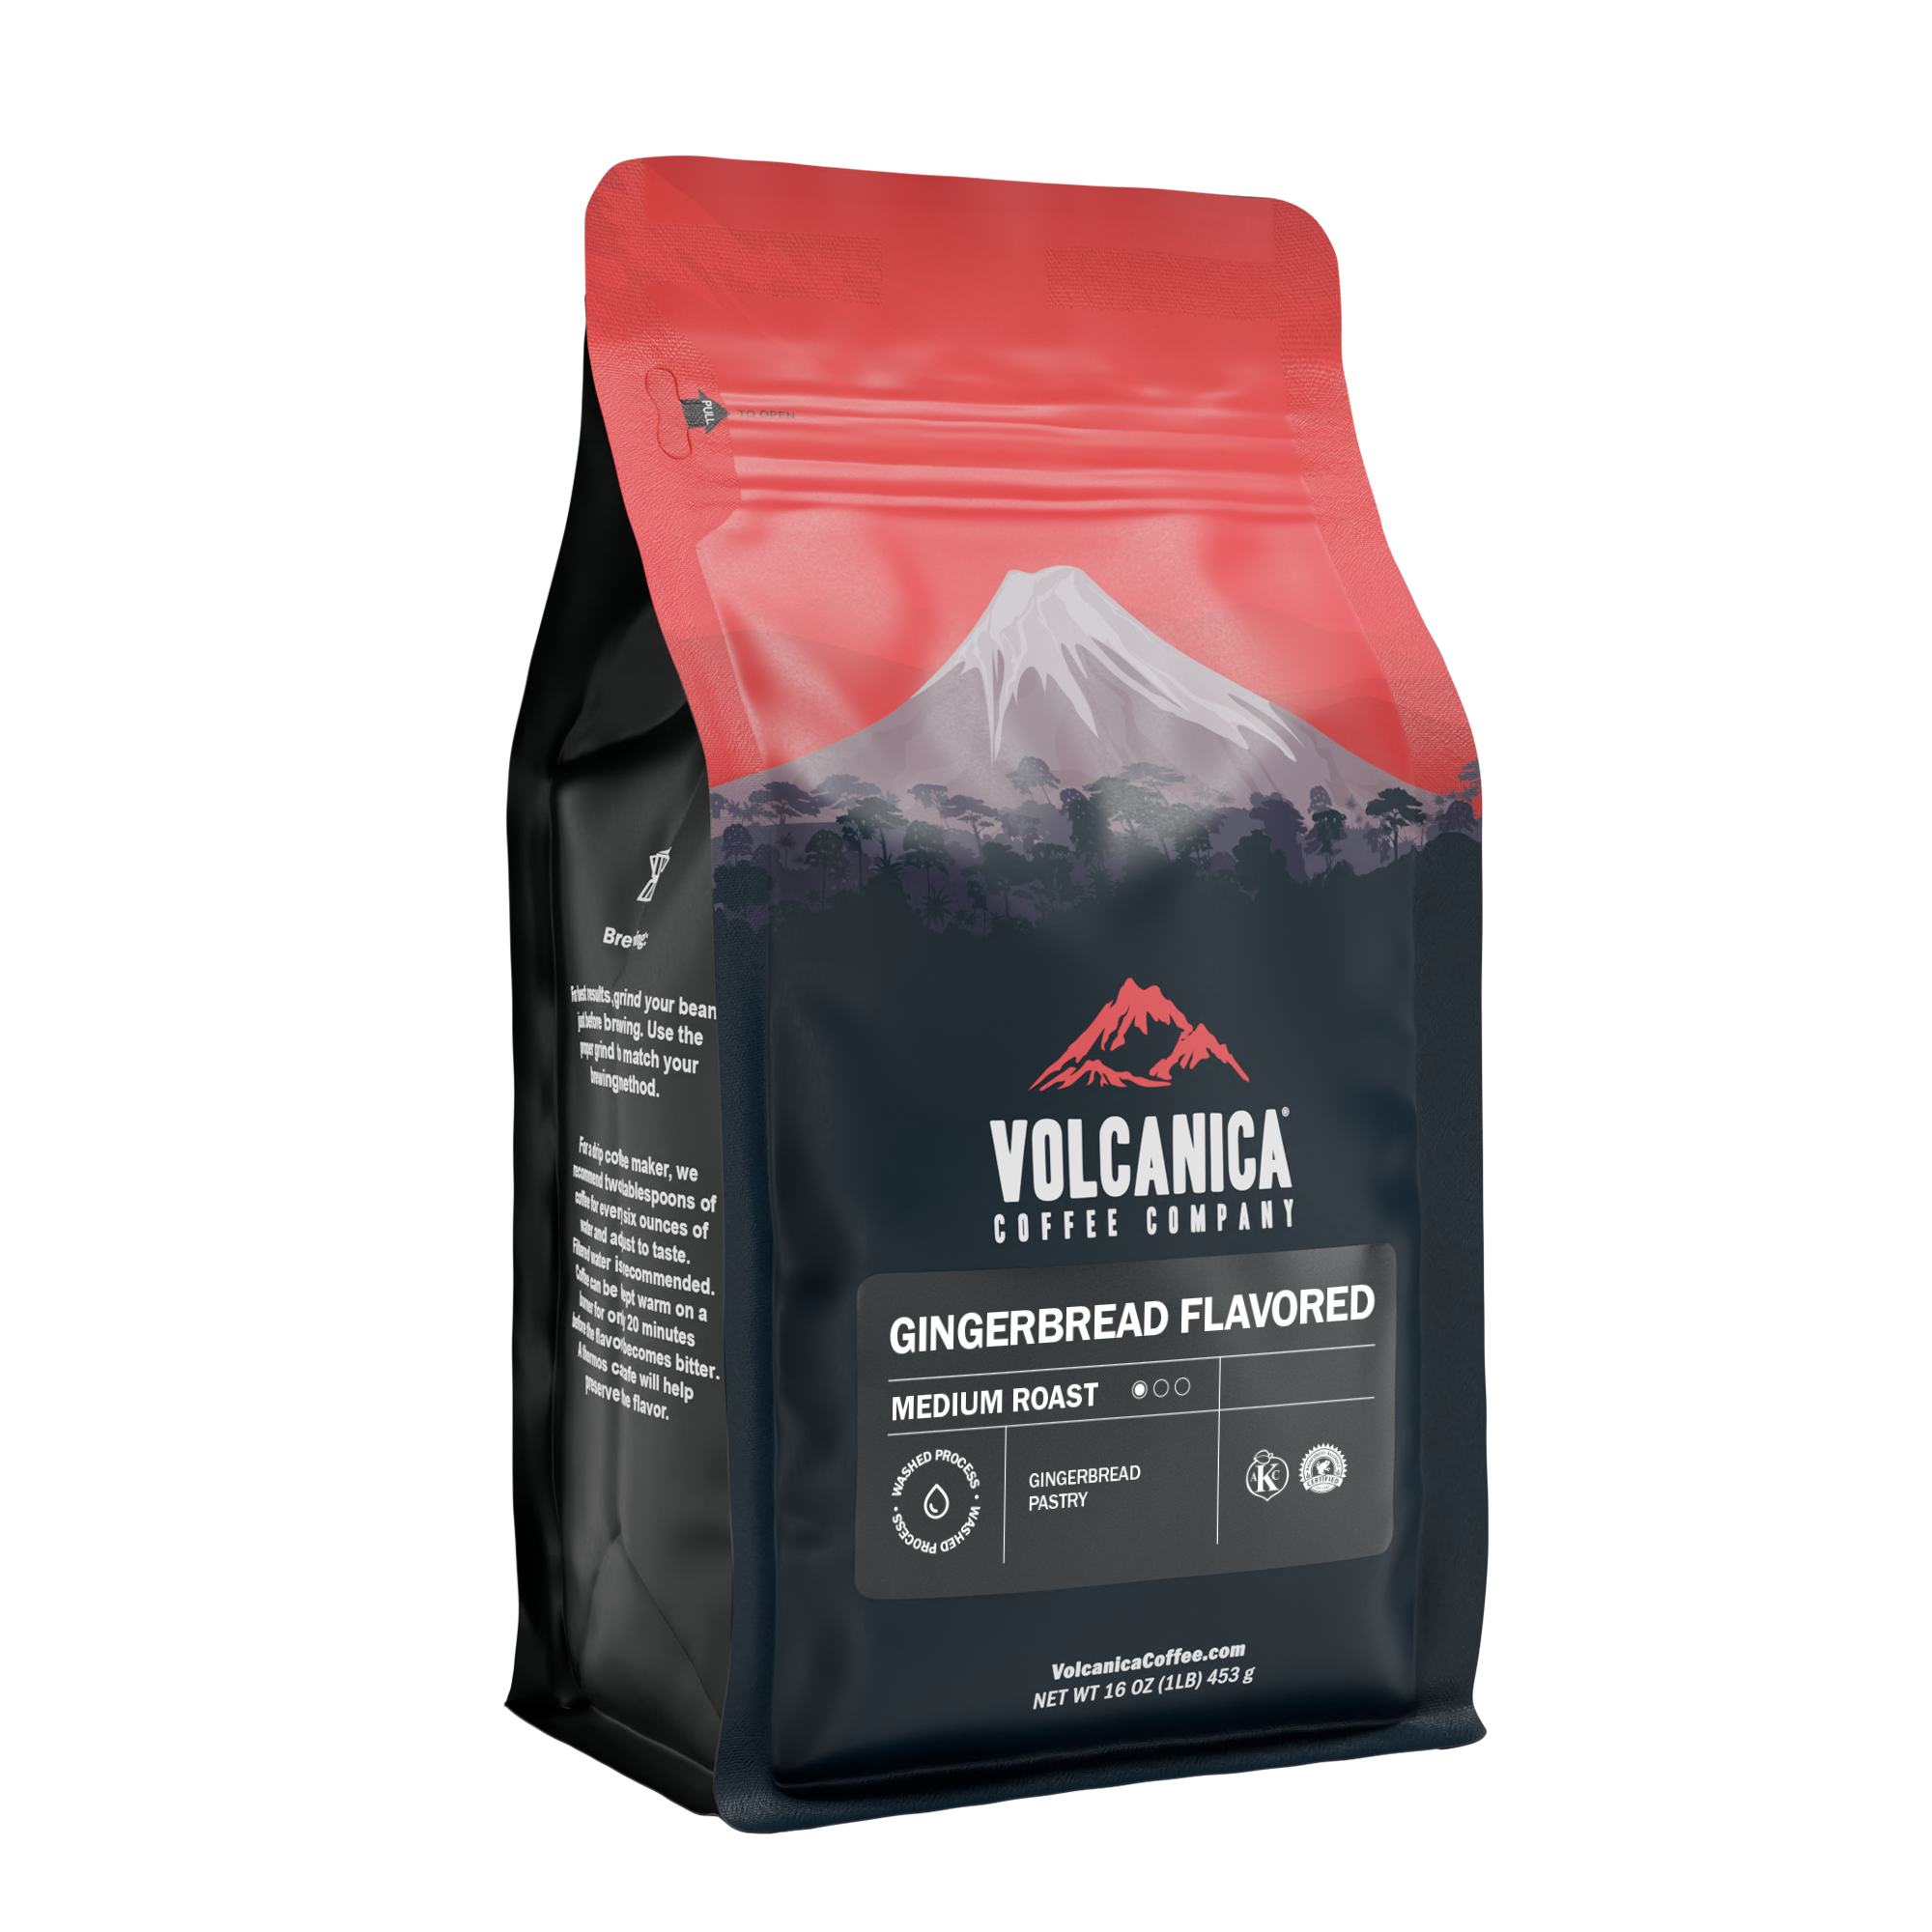 Gingerbread Flavored Coffee - Volcanica Coffee